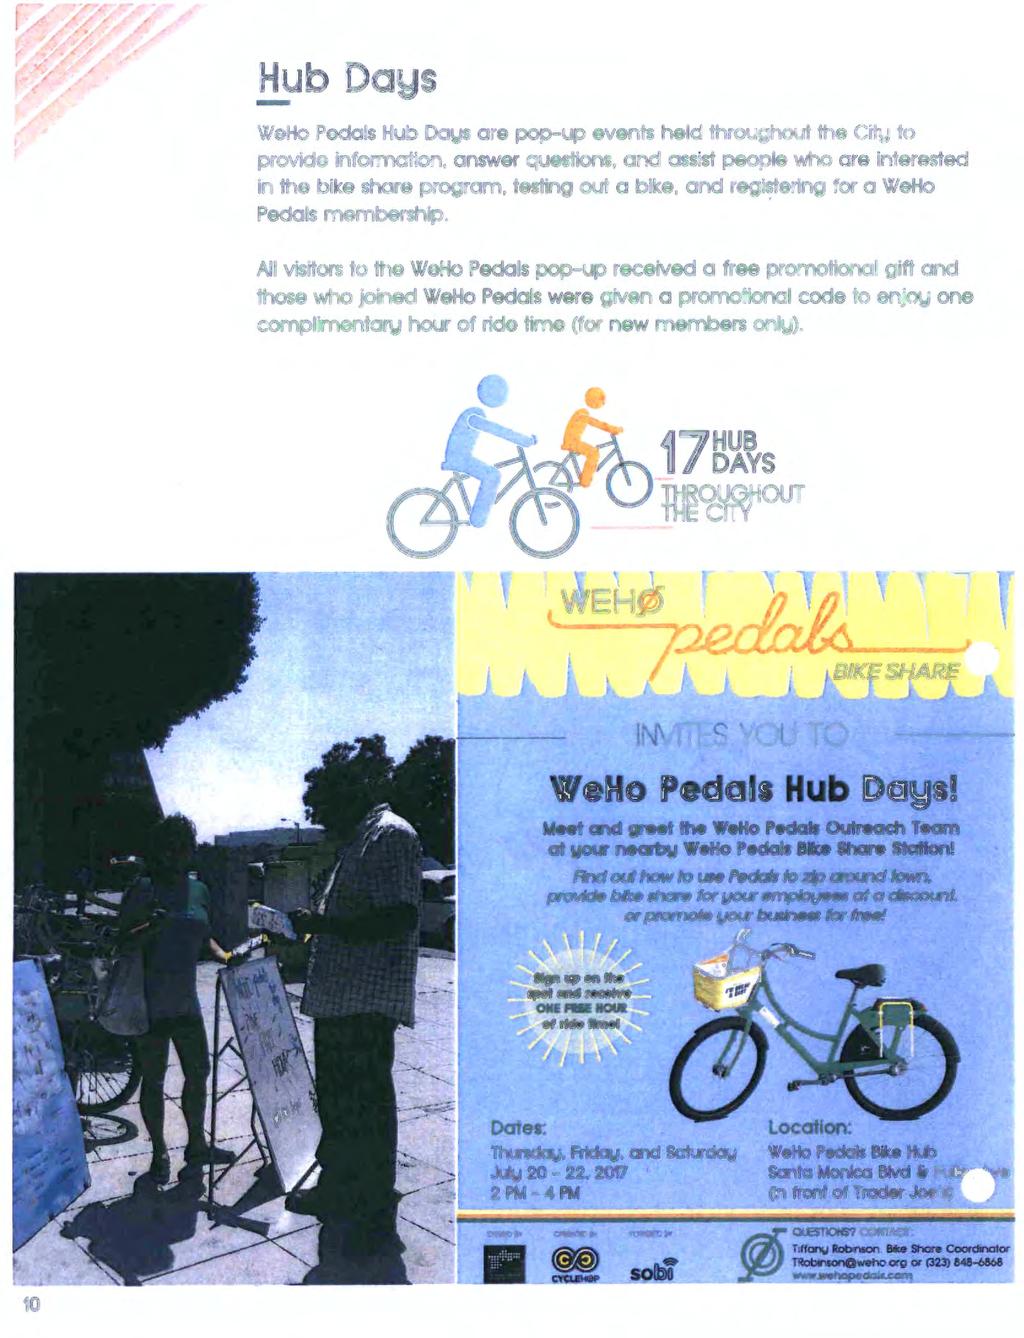 Hub Days - WeHo Pedals Hub Days are pop-up events held throughout the City to provide information.